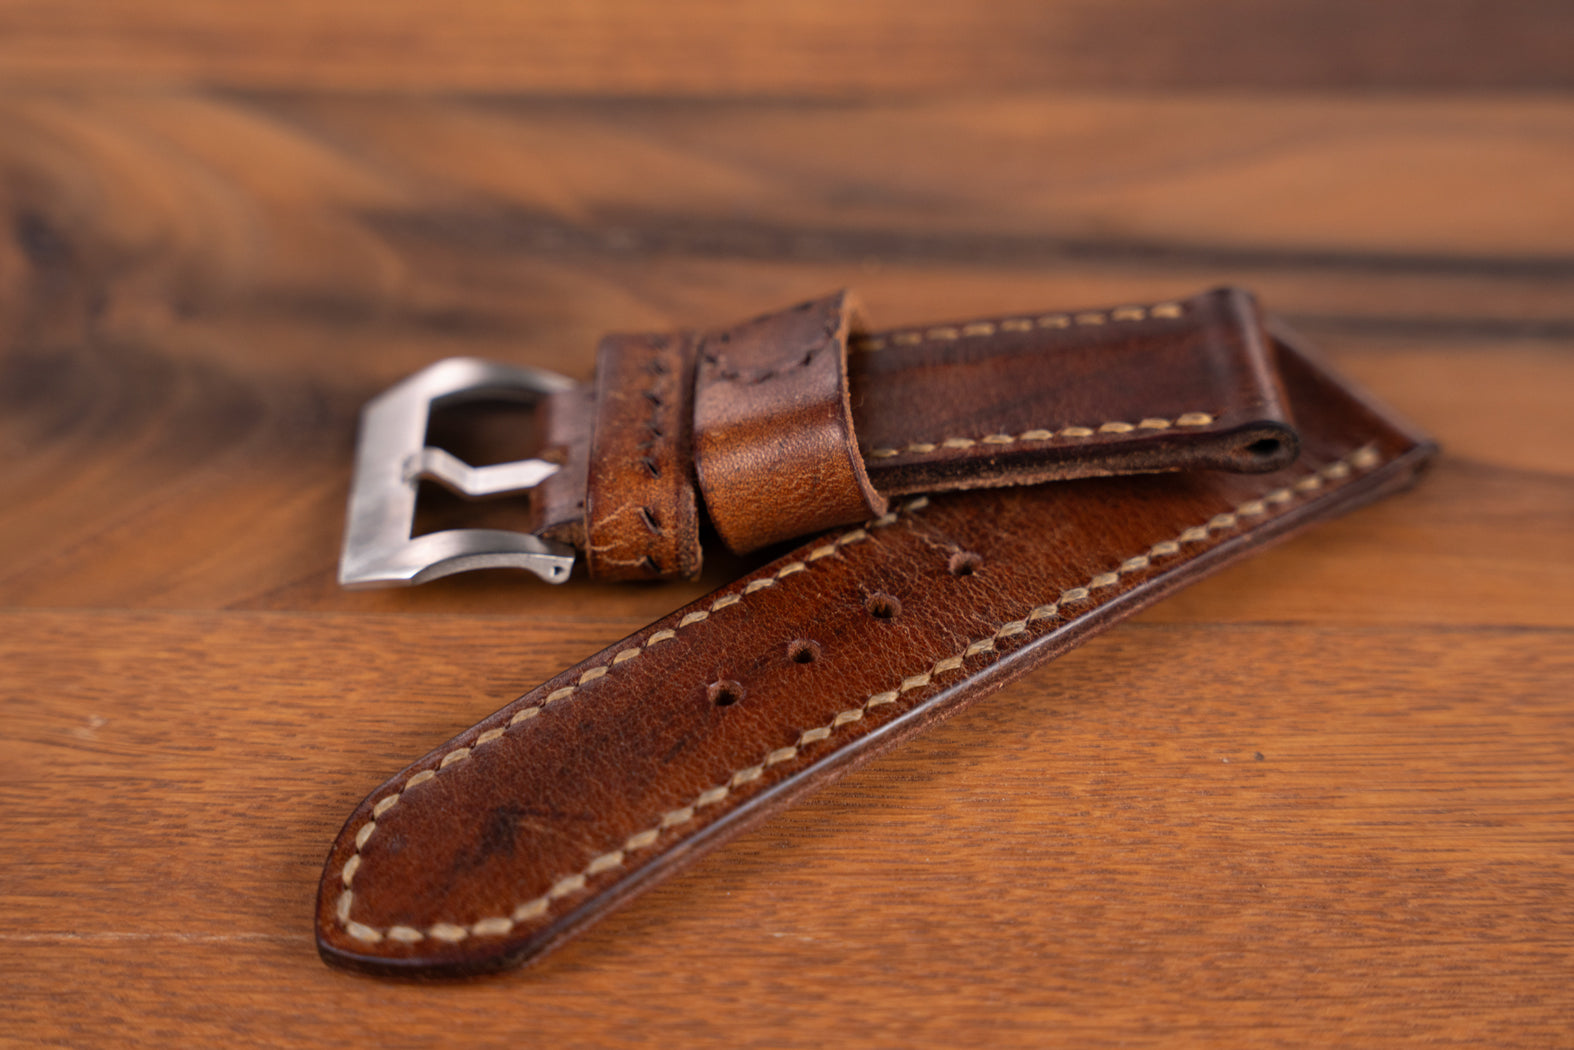 Ammo Watch Strap - 078 - In Stock!